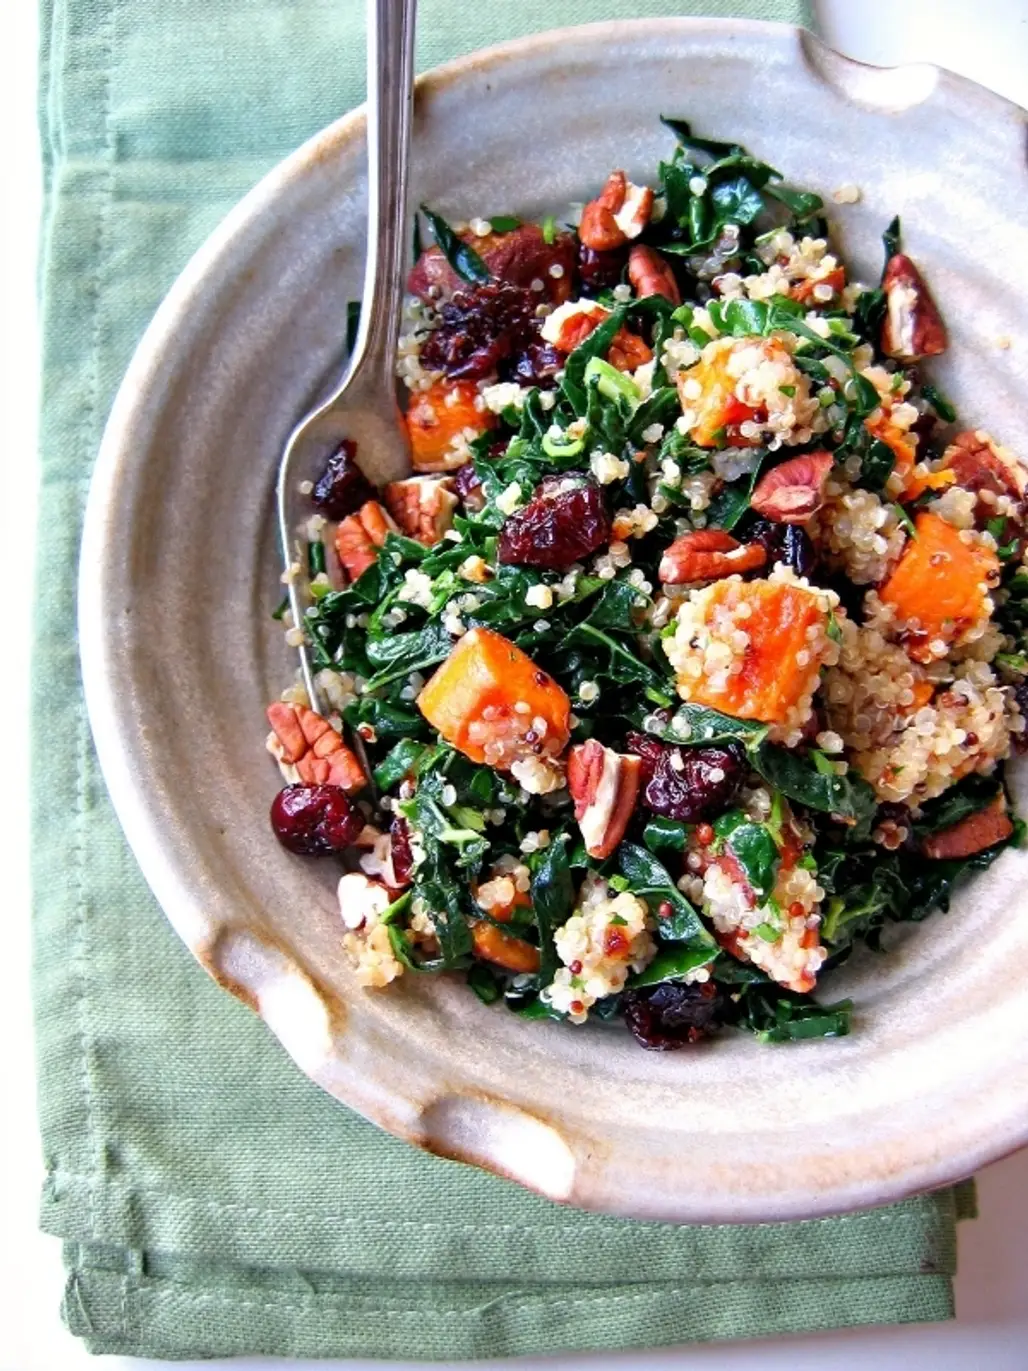 Roasted Sweet Potatoes with Cranberries, Quinoa, Kale, and Pecans